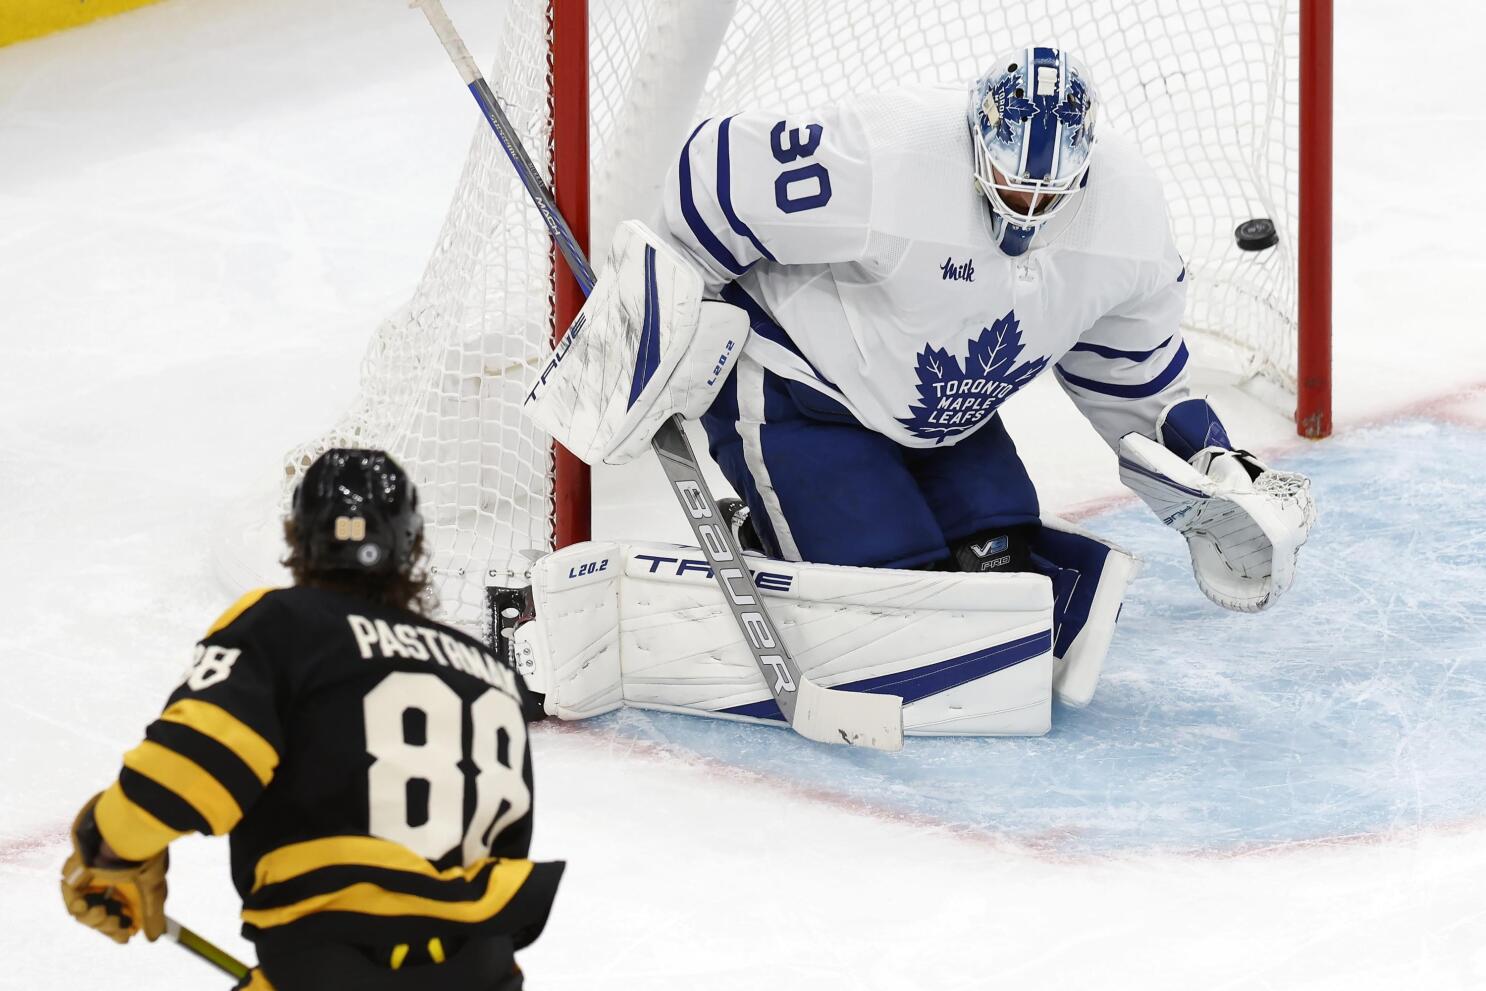 Toronto Maple Leafs: Wayne Simmonds loss a huge blow for player